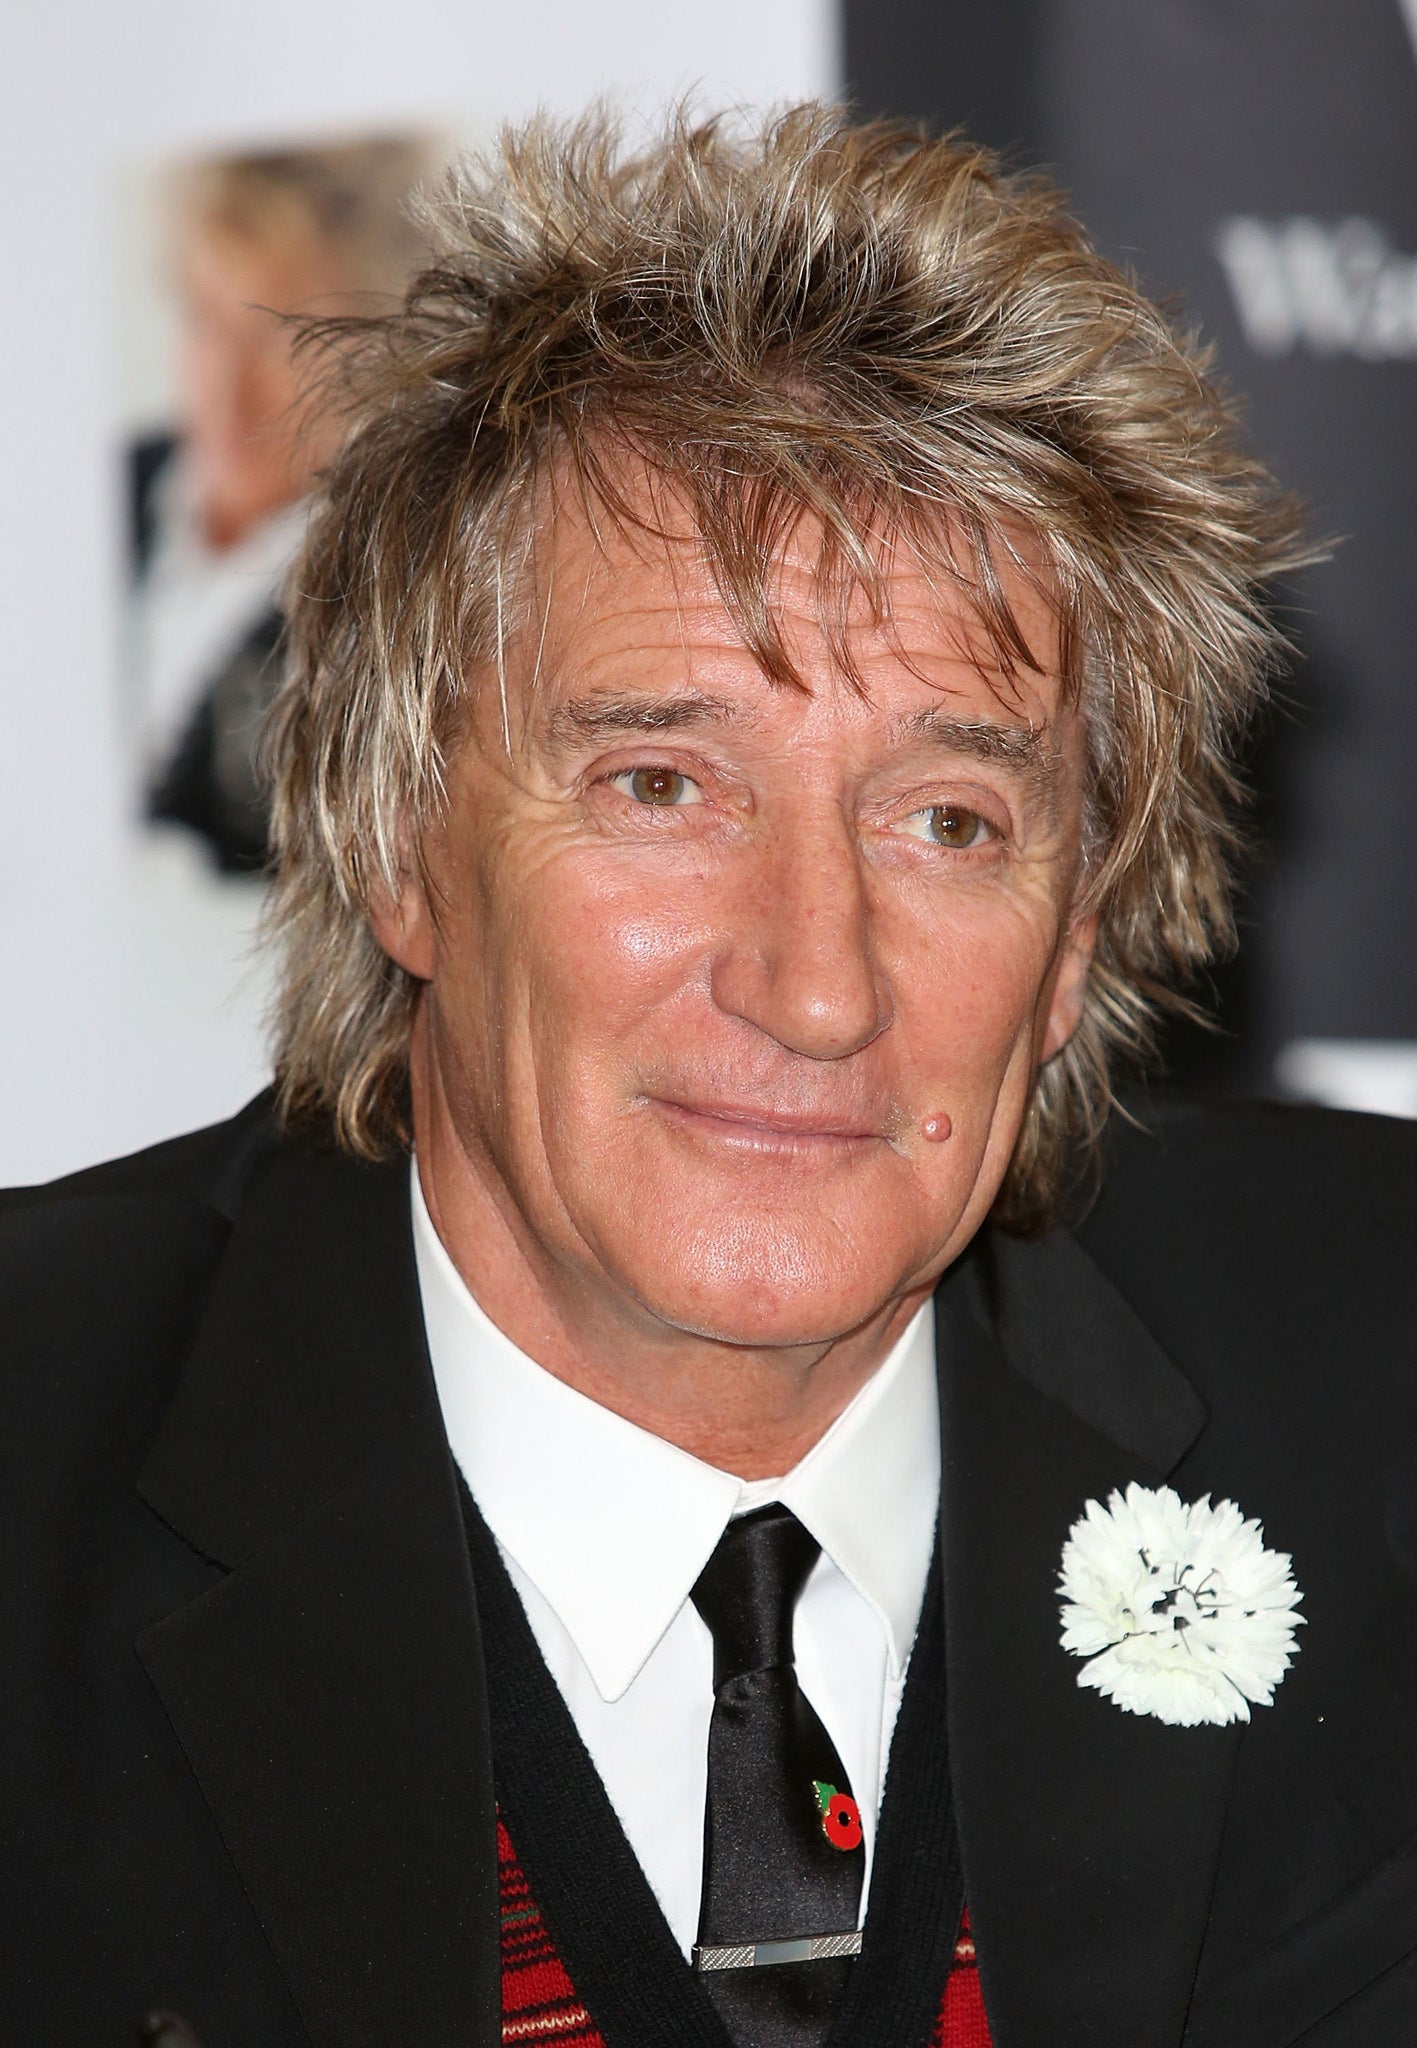 Rod Stewart: Songs, wife, age and more